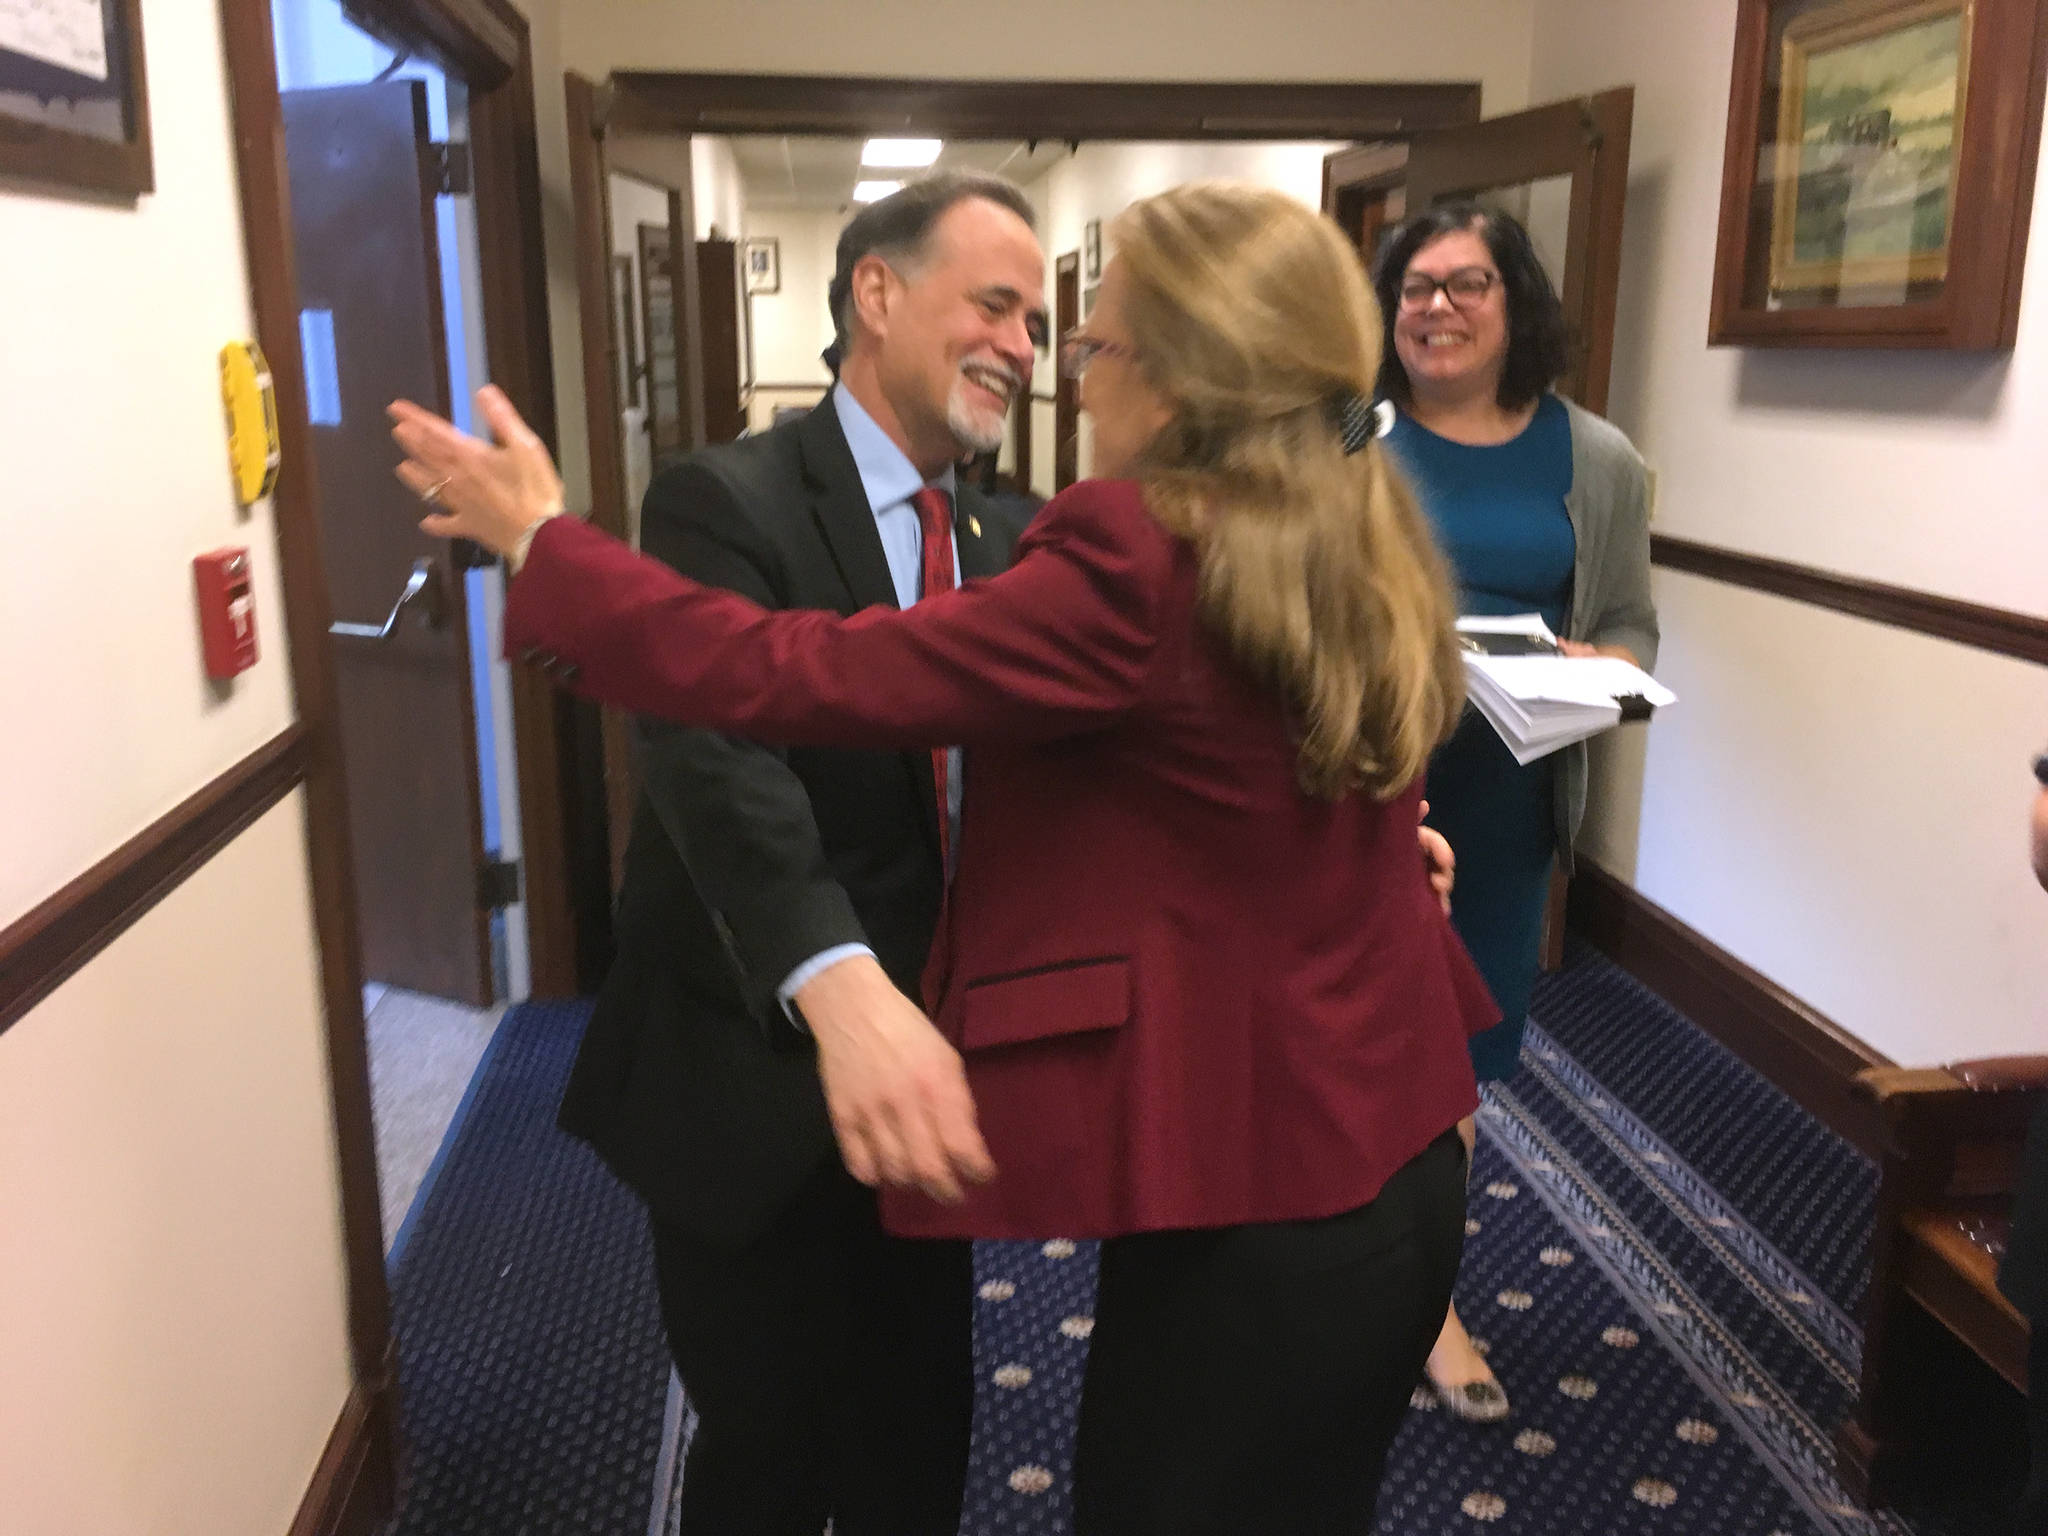 James Brooks/Juneau Empire Sen. Peter Micciche, R-Soldotna (left), receives a hug from Emily Nenon, Alaska government relations director for the American Cancer Society Cancer Action Network. The action network was a major supporter of Senate Bill 63, and the pair were celebrating the passage of SB 63 on Saturday, May 12.